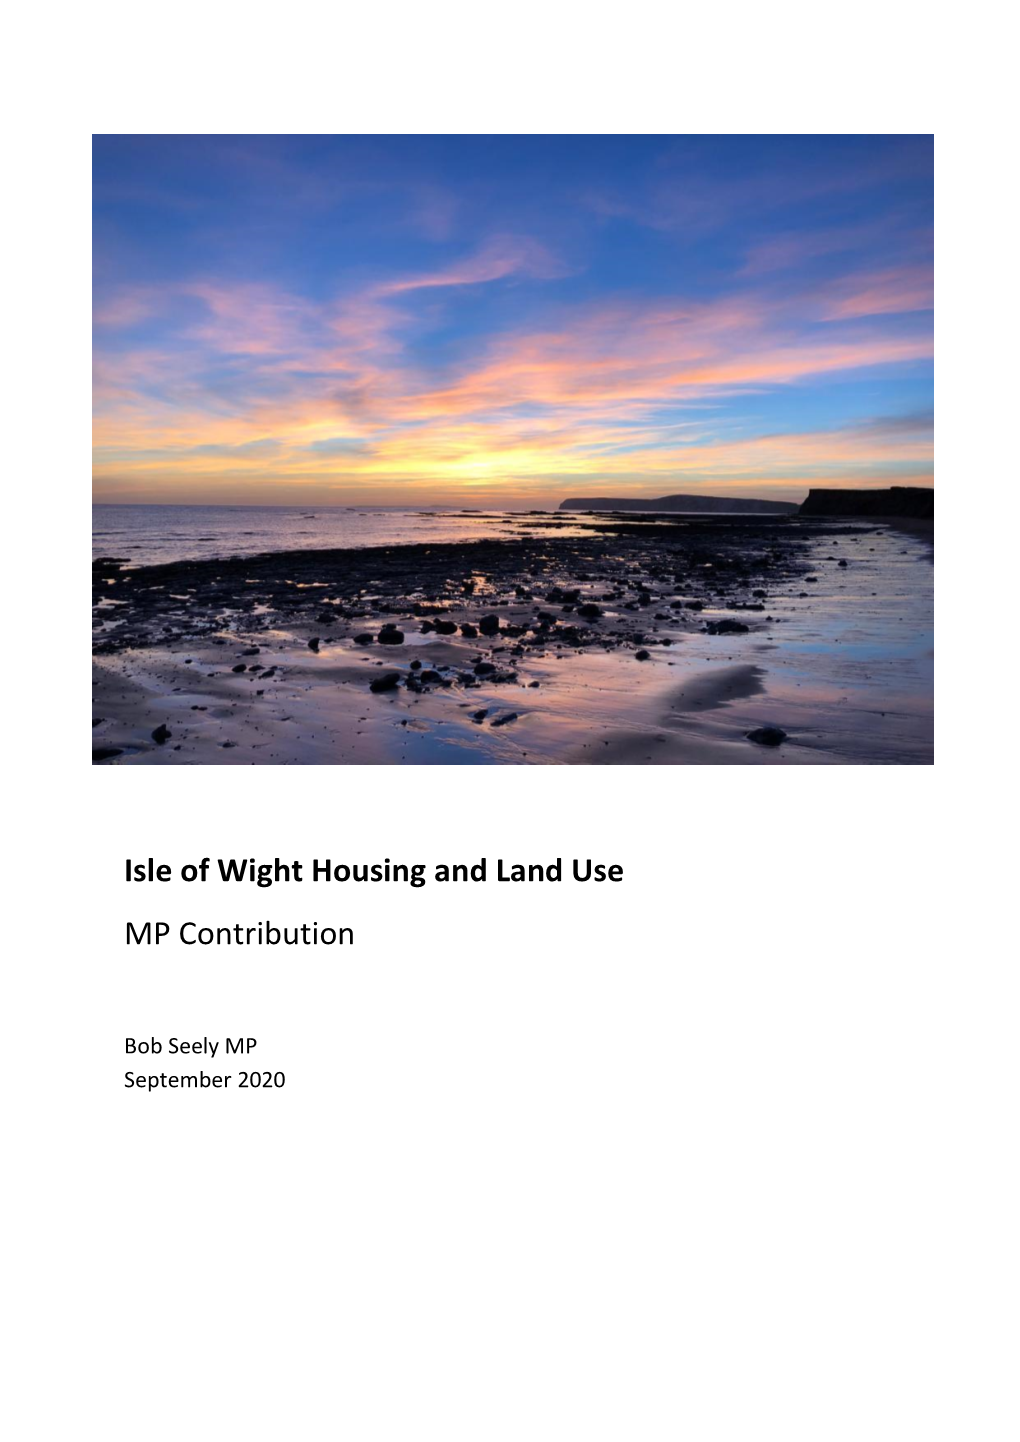 Isle of Wight Housing and Land Use MP Contribution